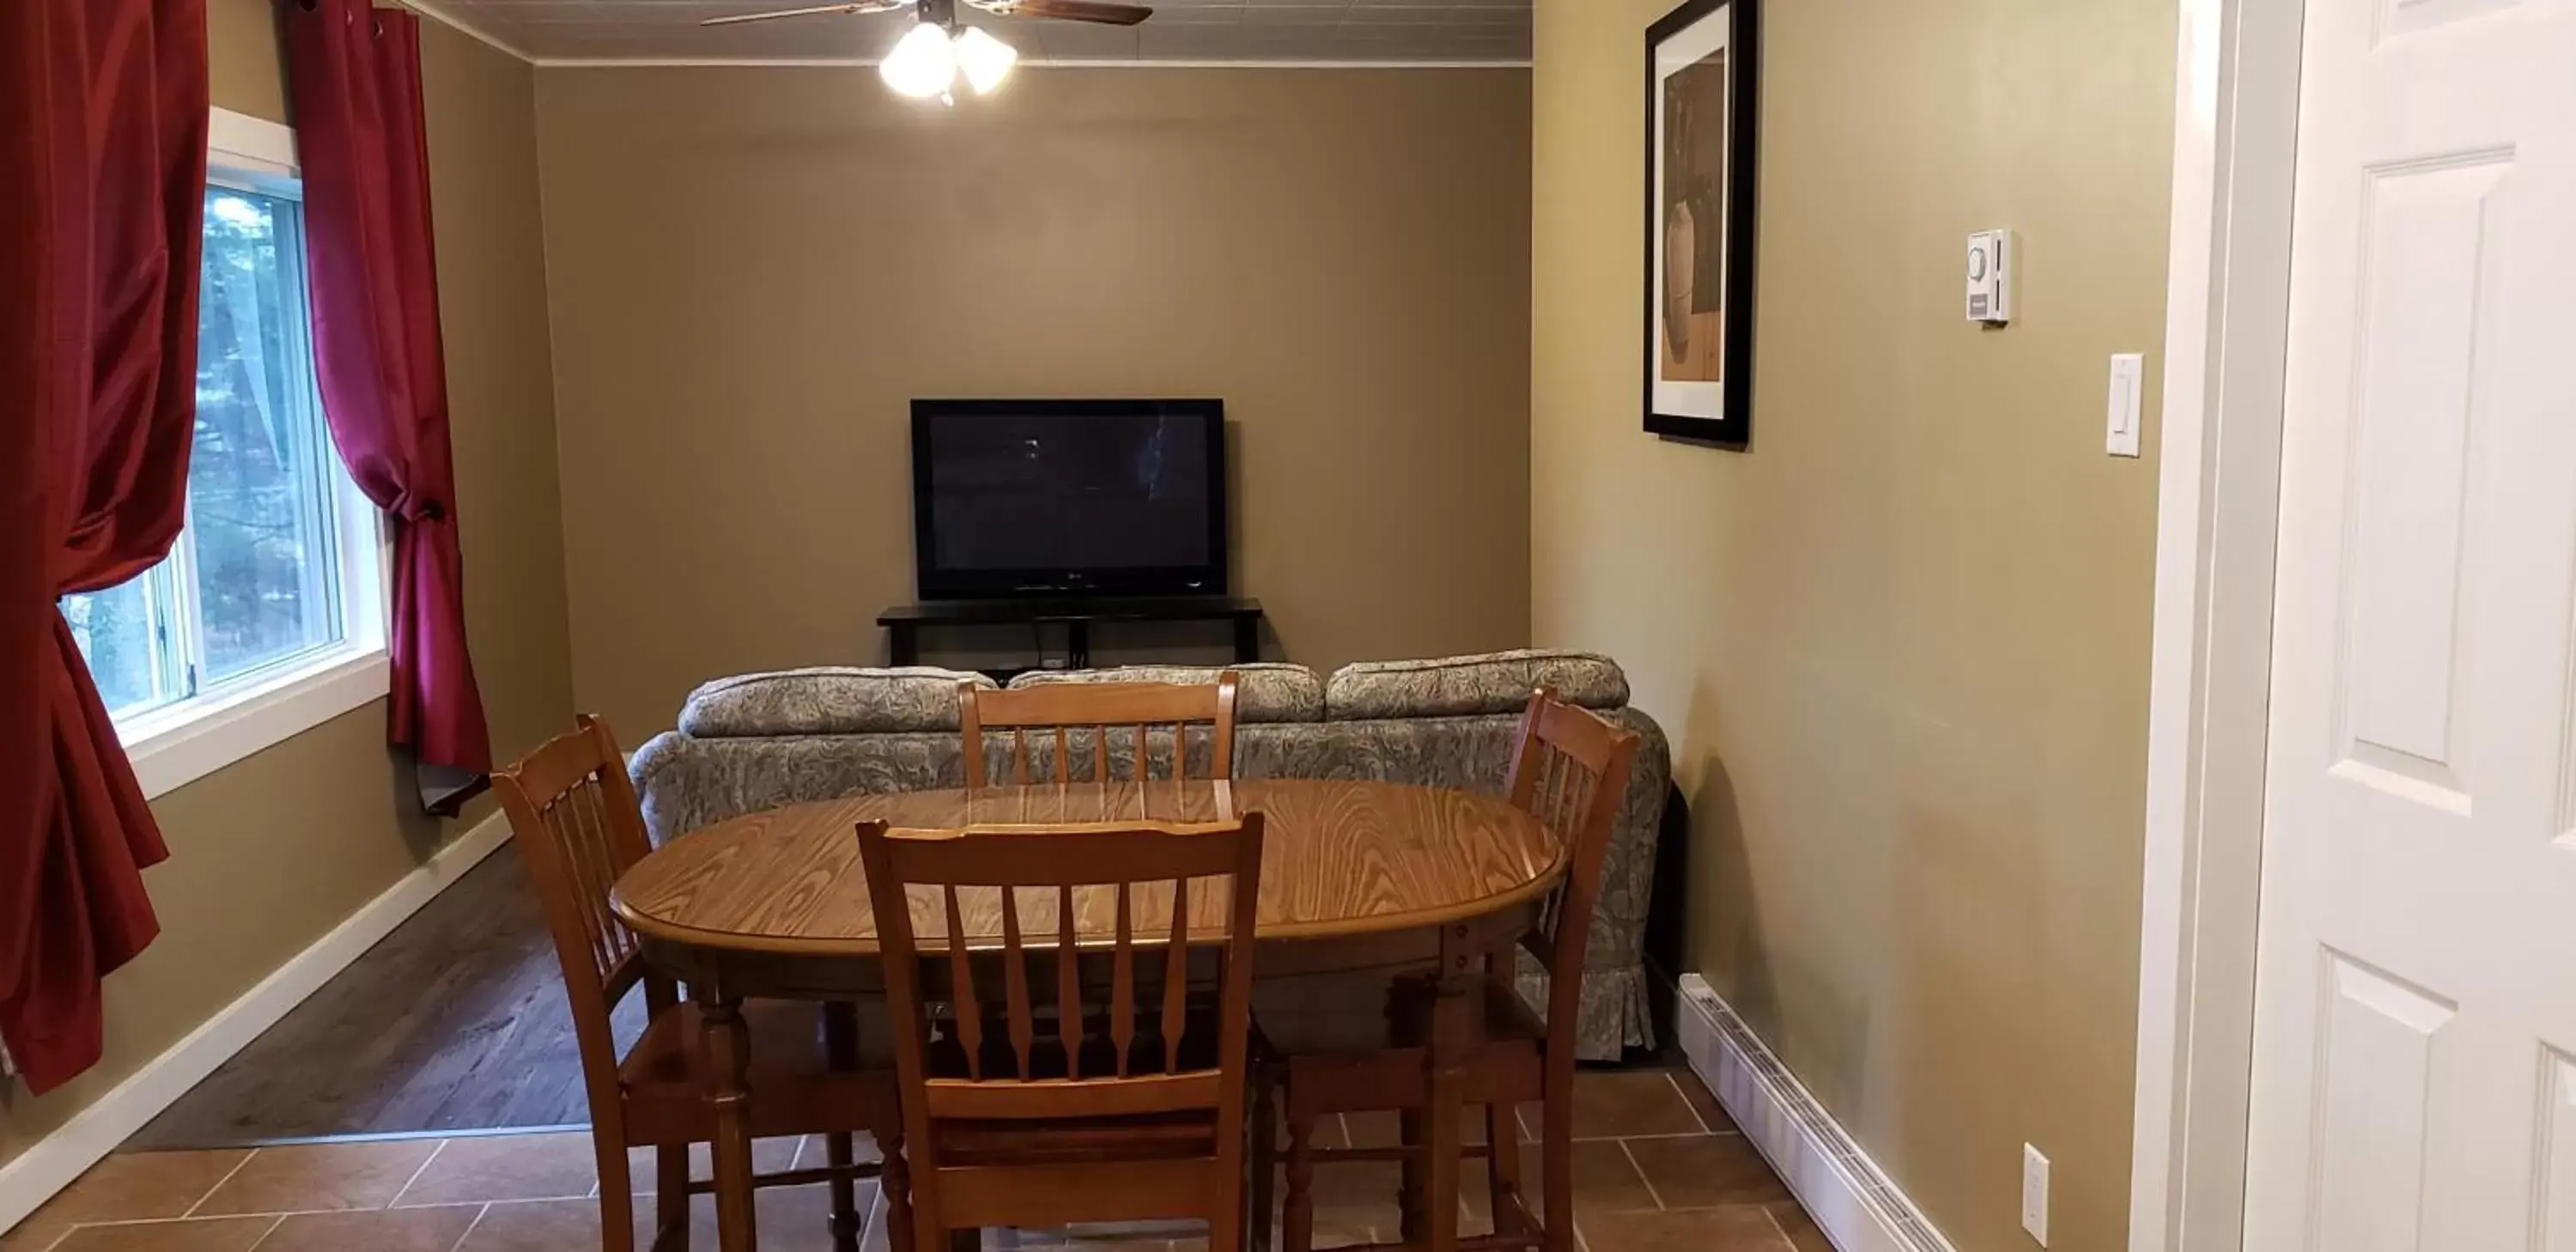 TV and multimedia, Dining Area in Malahat Bungalows Motel